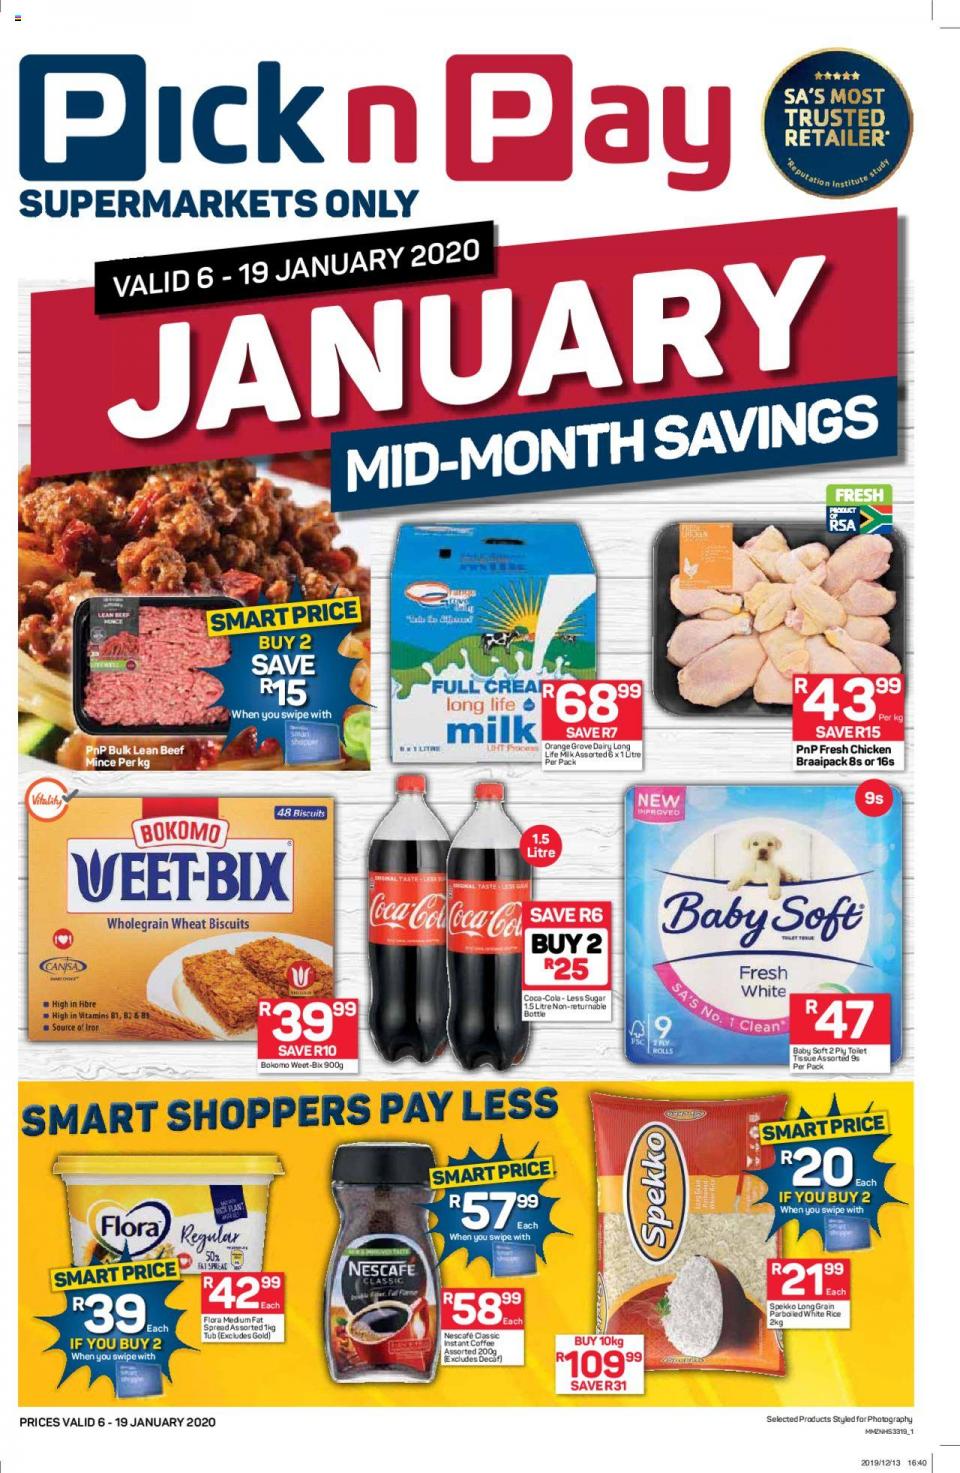 pick n pay specials mid month savings 7 january 2020